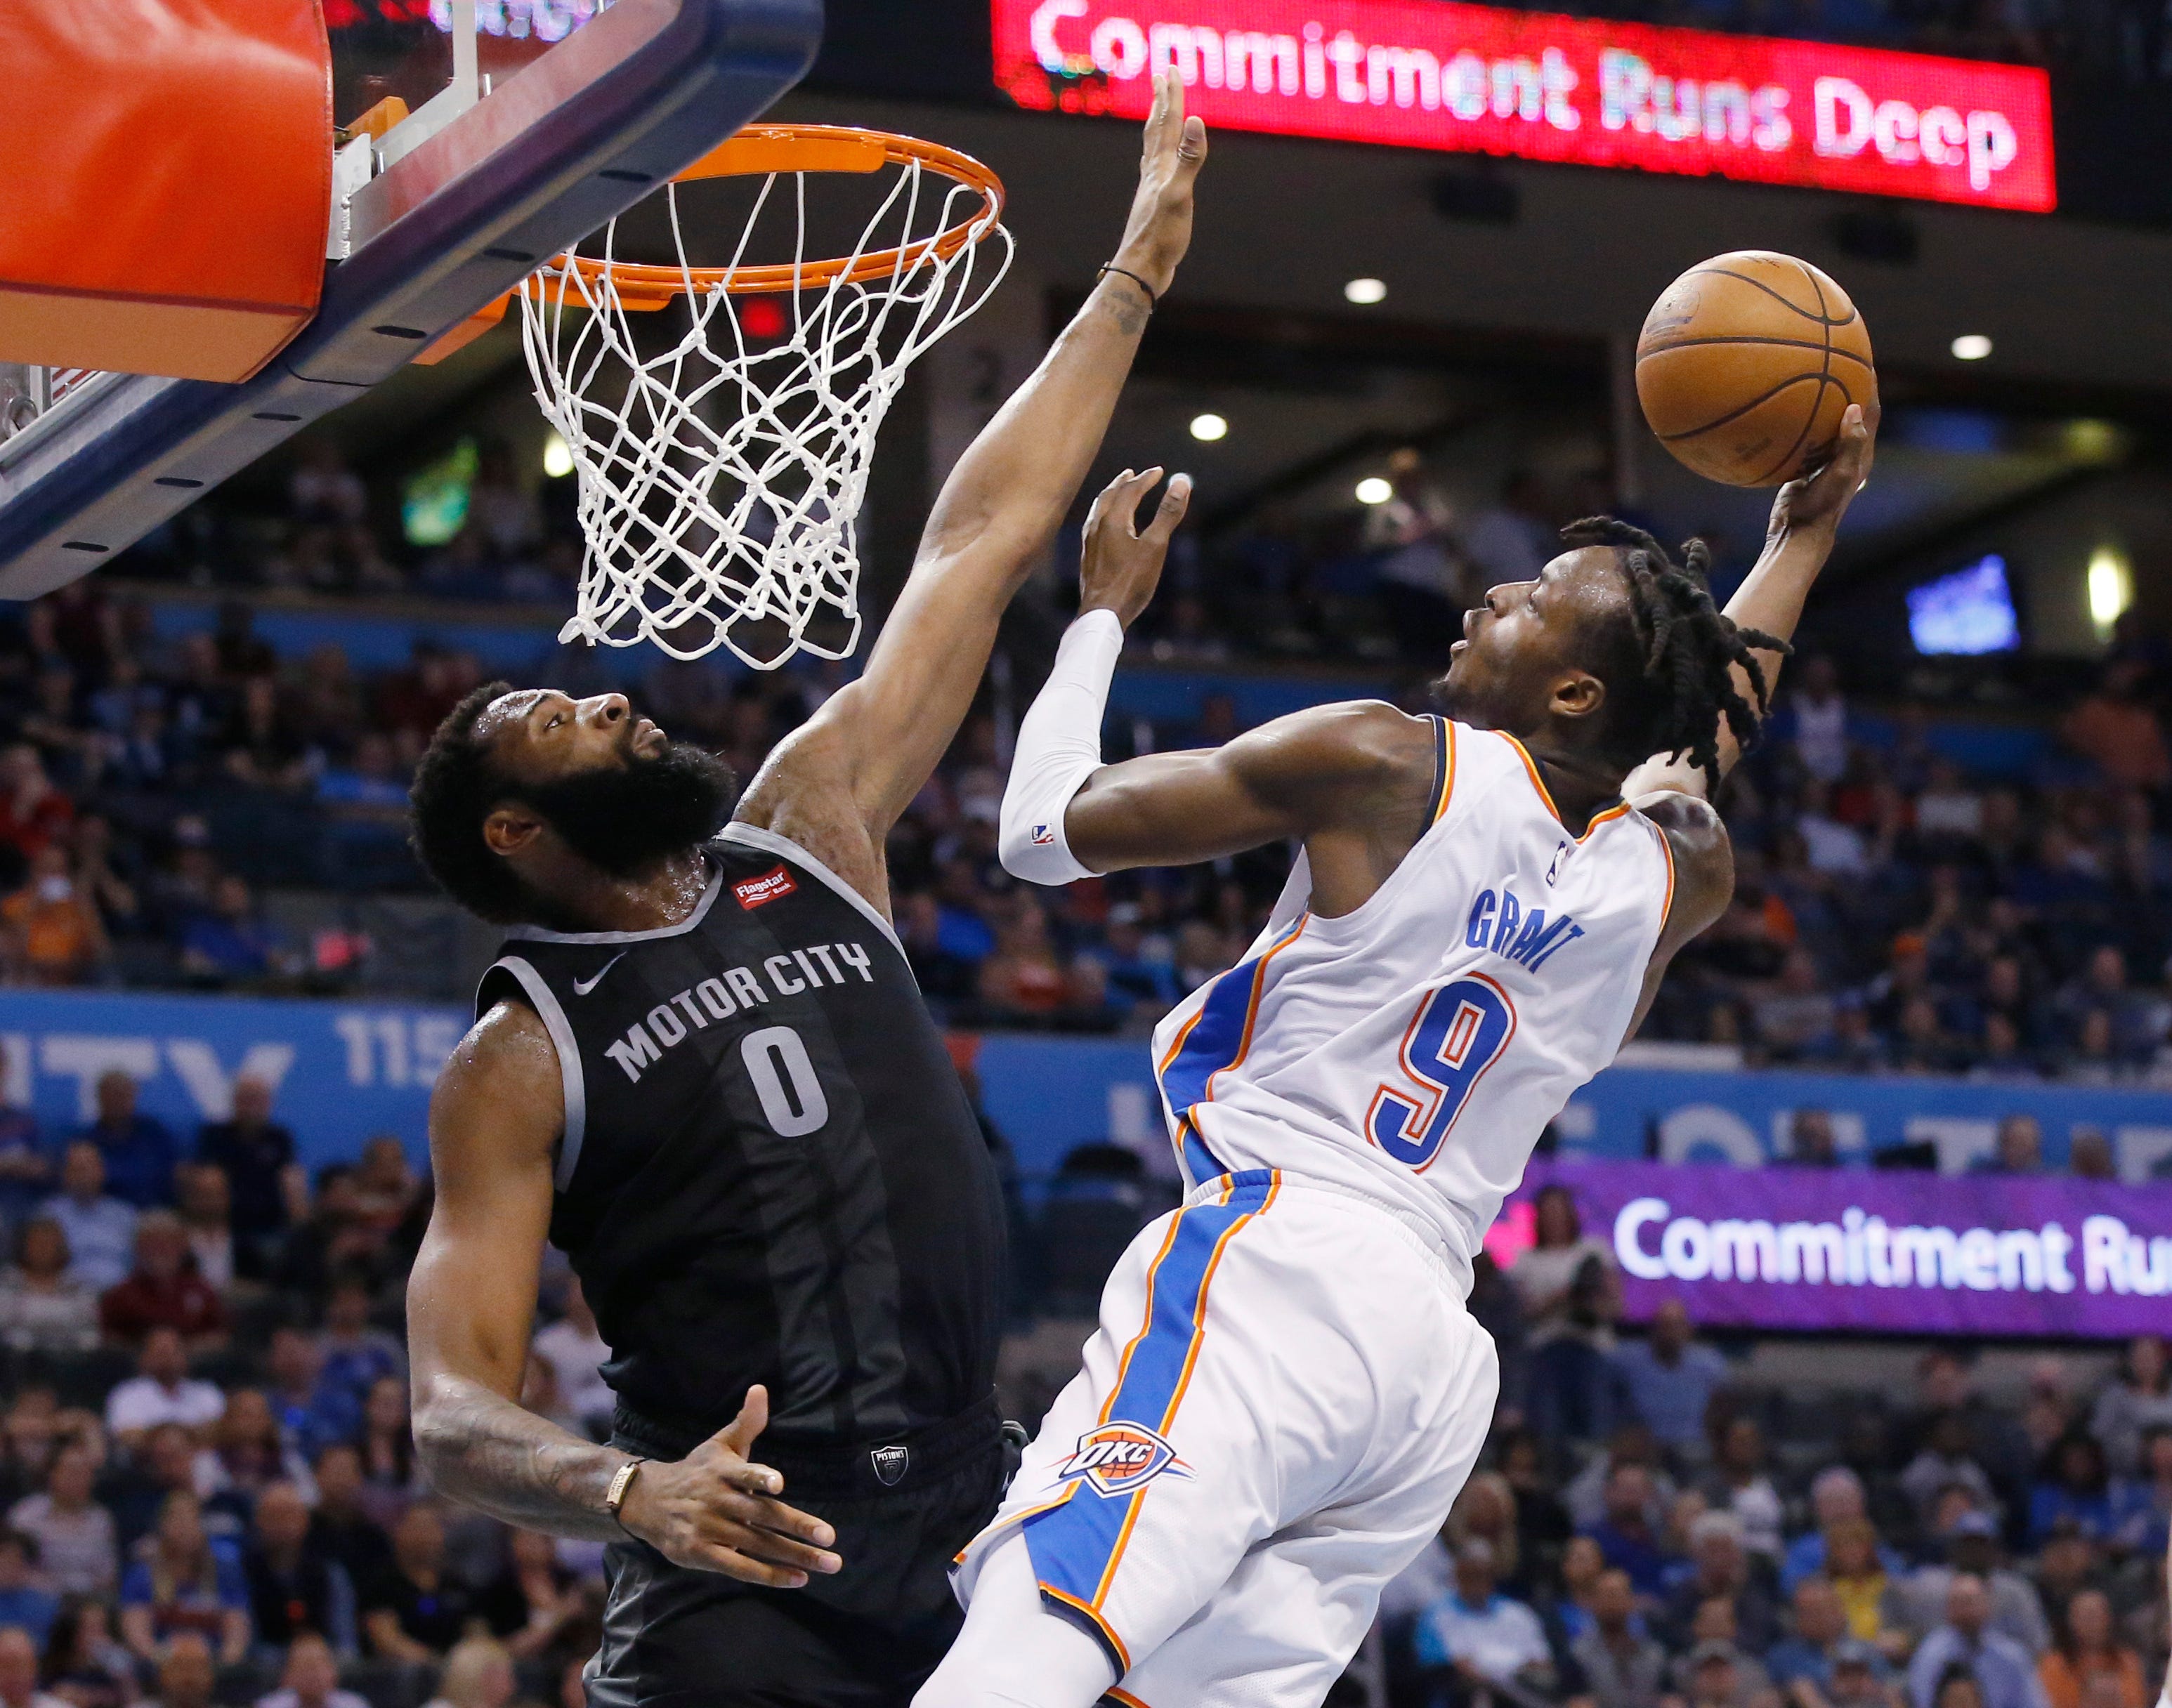 Oklahoma City Thunder forward Jerami Grant (9) shoots as Detroit Pistons center Andre Drummond (0) defends during the second half.